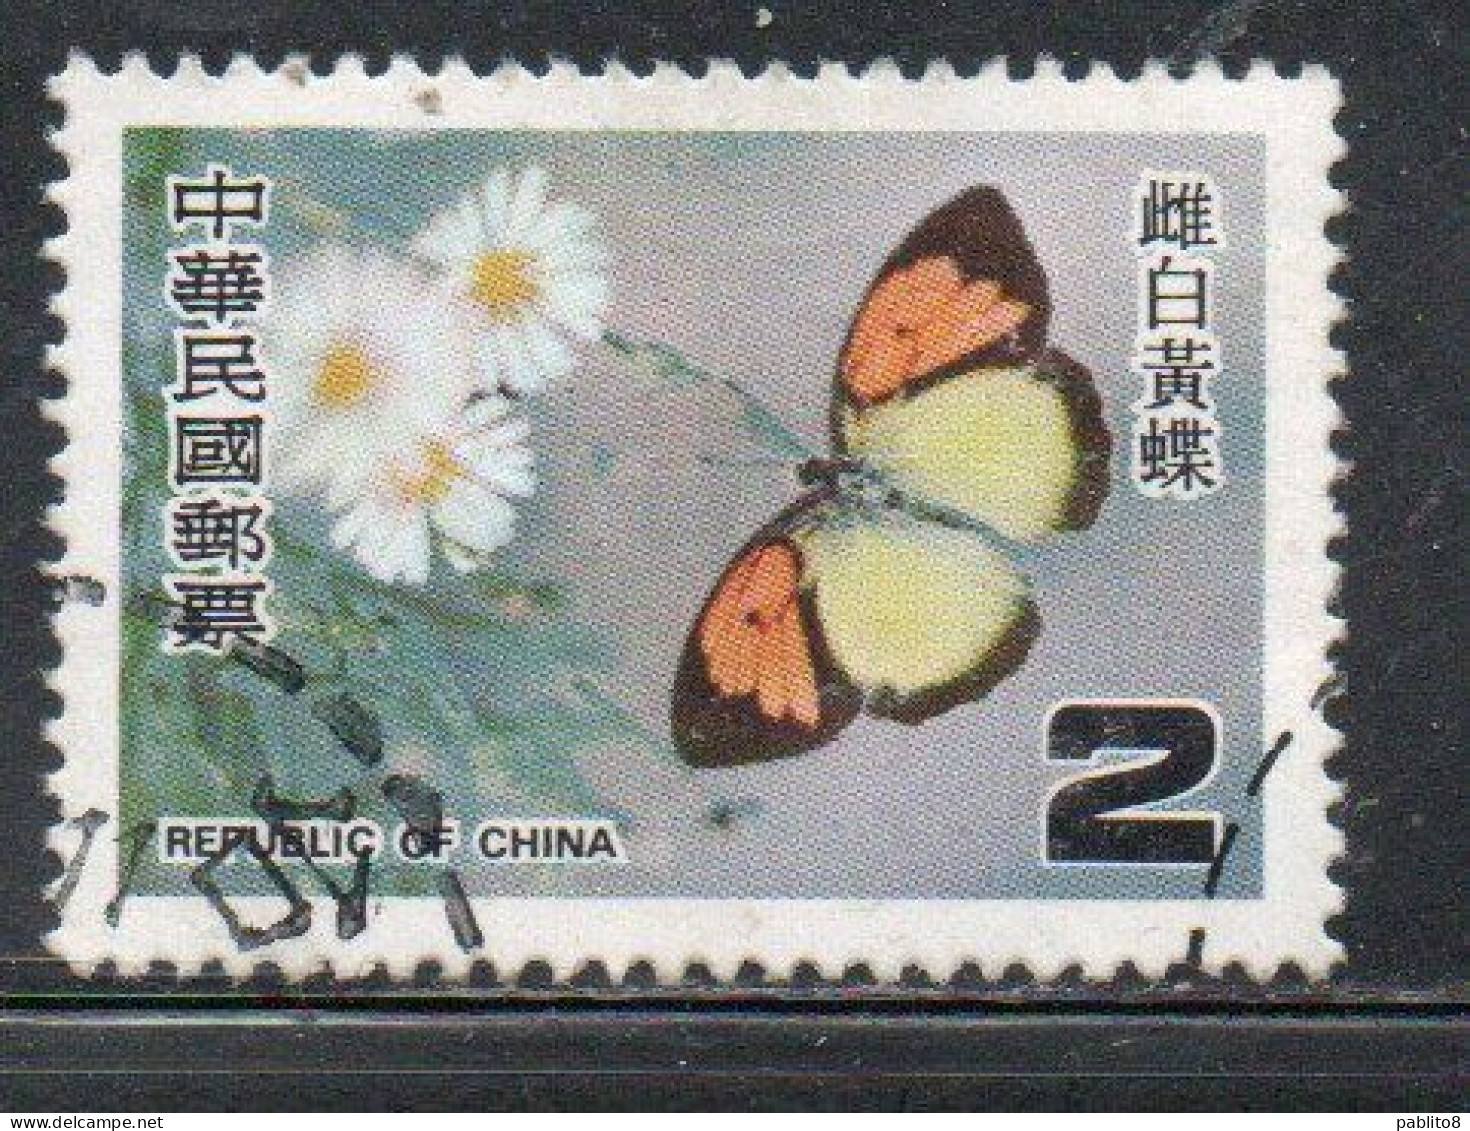 CHINA REPUBLIC CINA TAIWAN FORMOSA 1978 PROTECTED BUTTERFLIES IXIAS PYRENE BUTTERFLY 2$ USED USATO OBLITERE' - Oblitérés